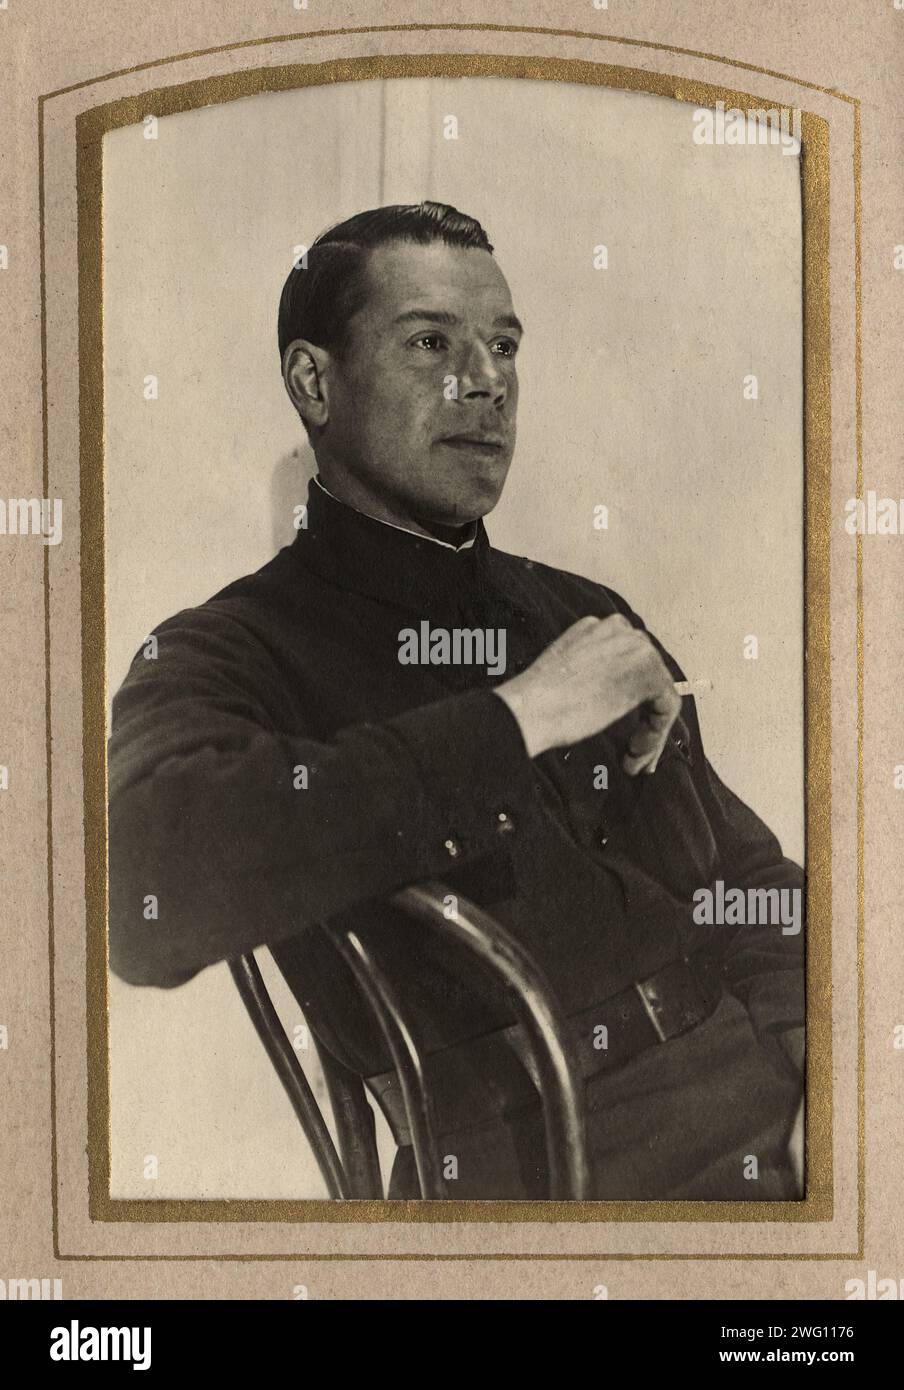 A young man in a military jacket, probably the son of A.F. Domishkevich, late 19th cent - early 20th cent. This collection of photographs and documents from the private archive of Sergei Mikhailovich Chashchin relates to the establishment of a firefighting service in eastern Siberia in the nineteenth and early twentieth centuries. It includes materials about early firefighting equipment, the organization of a Siberian firefighting team, and the leaders of Siberia's first firefighting service. Stock Photo